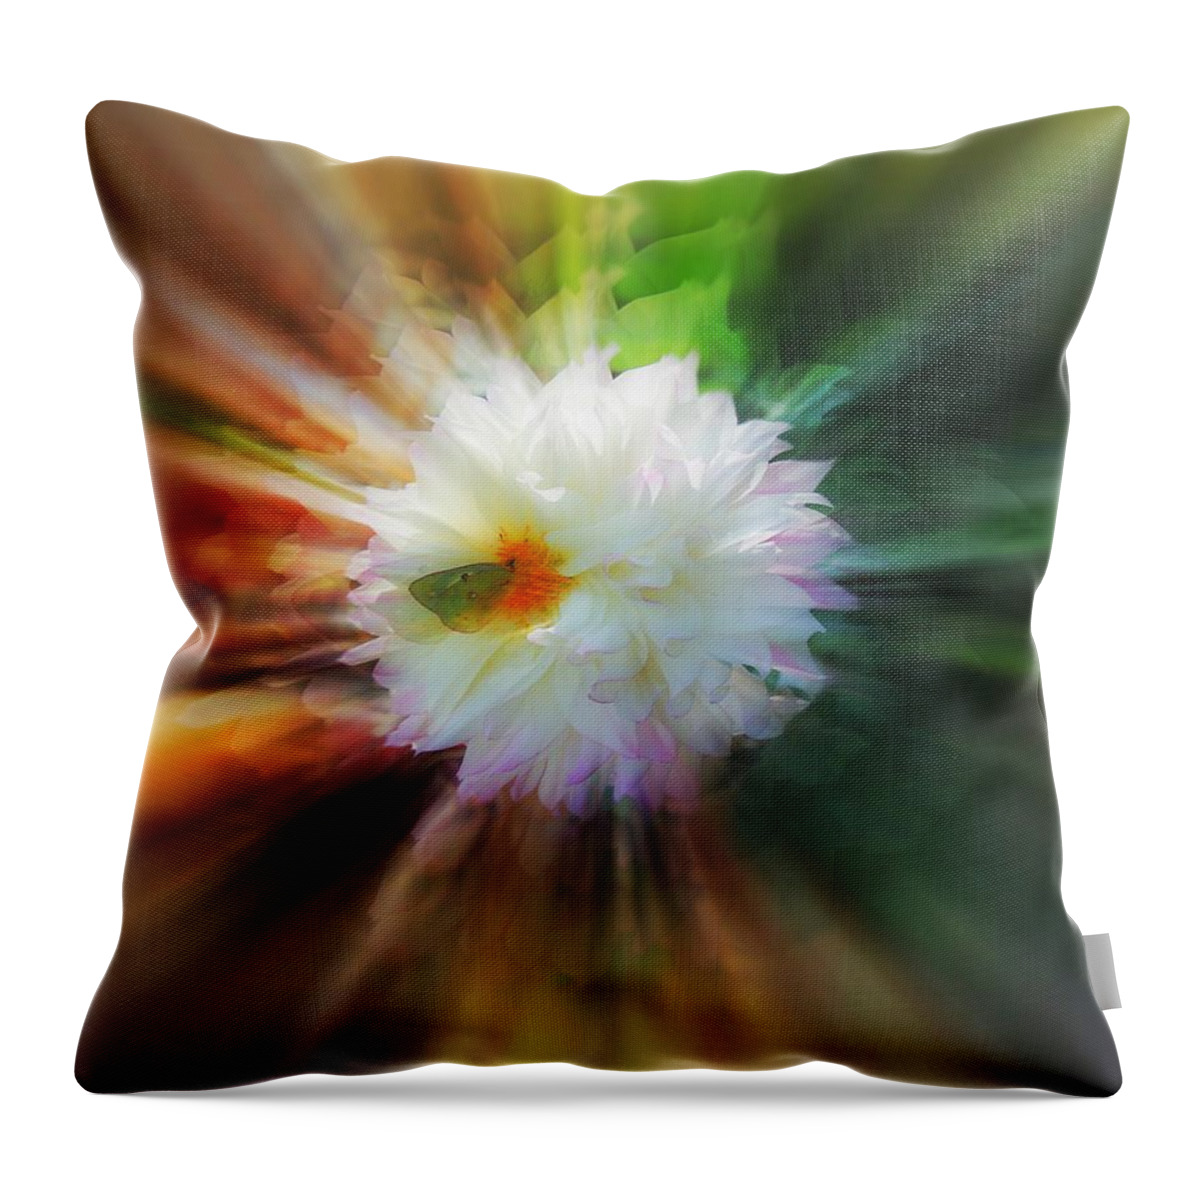 Butterfly On White Flower Throw Pillow featuring the digital art Butterfly on white flower by Lilia S